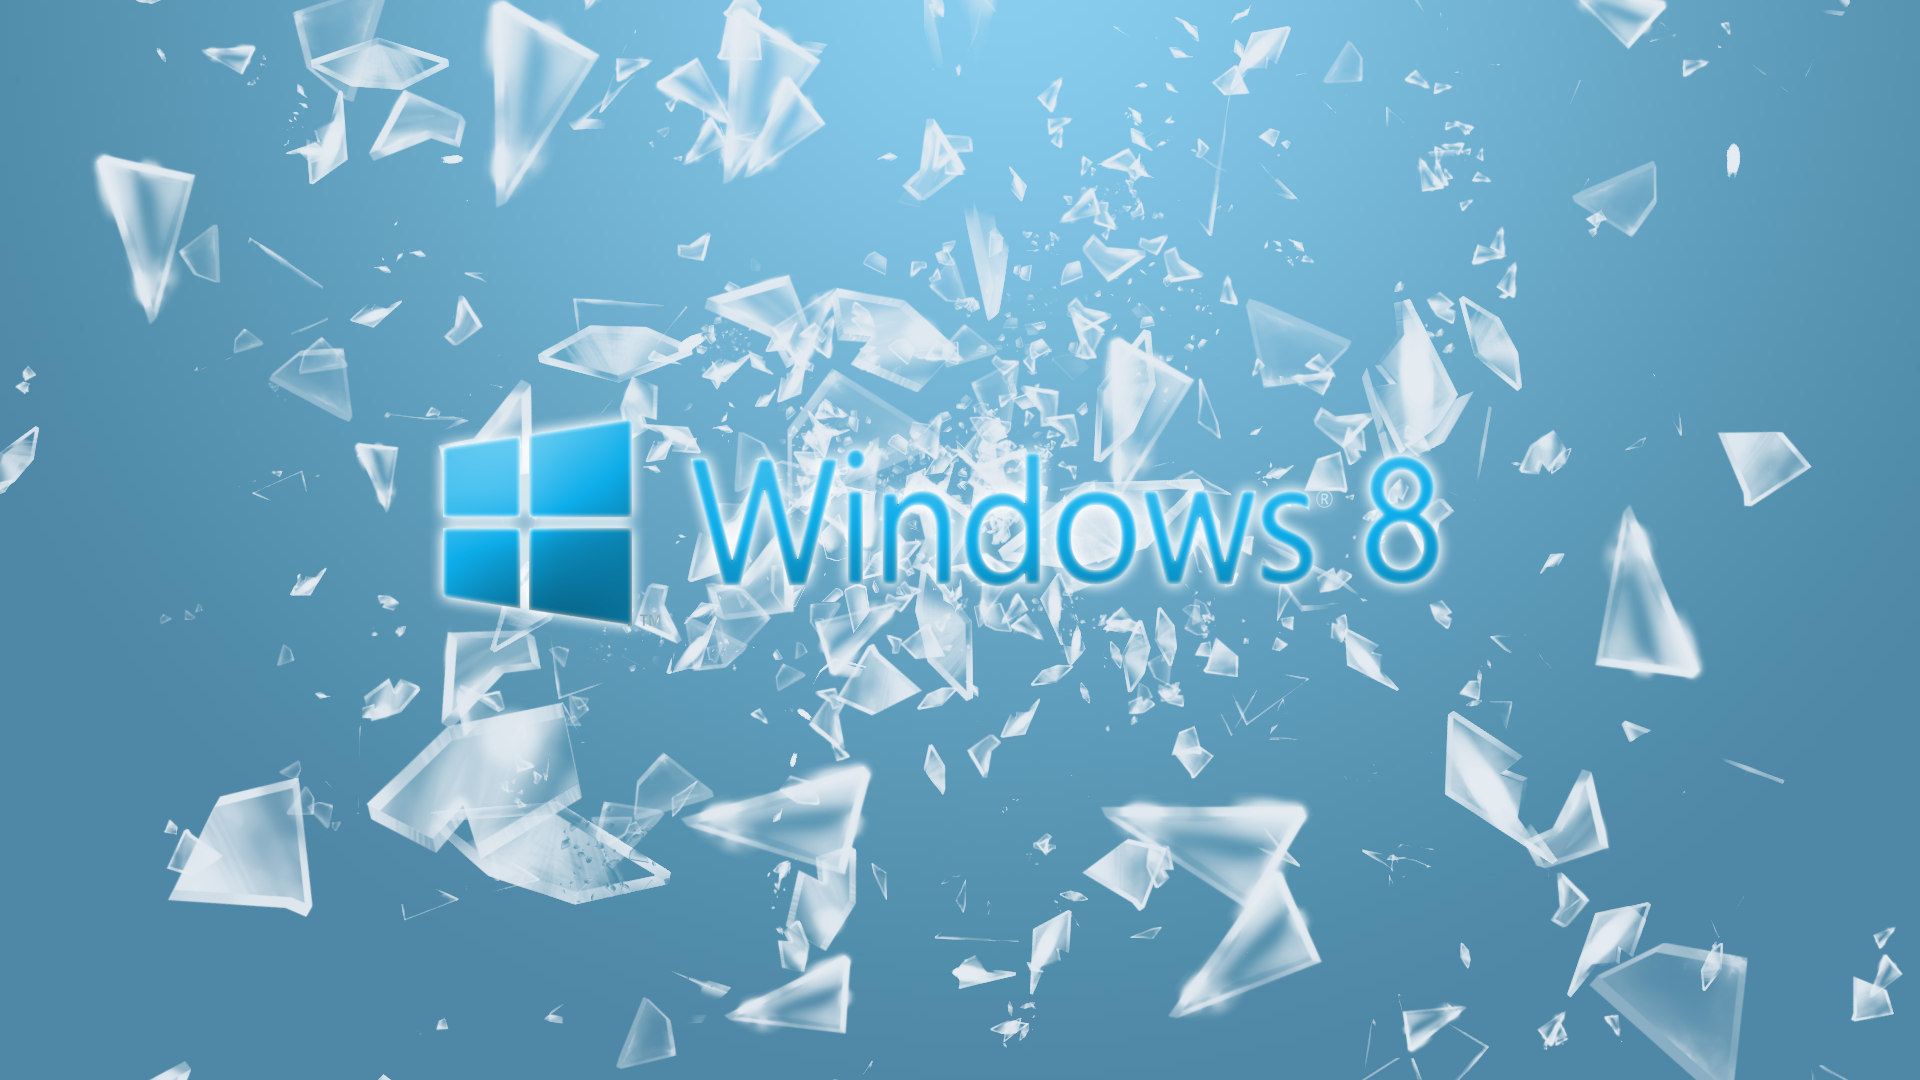 Windows D Wallpapers Wallpaper Windows 8 Wallpapers HD Wallpapers